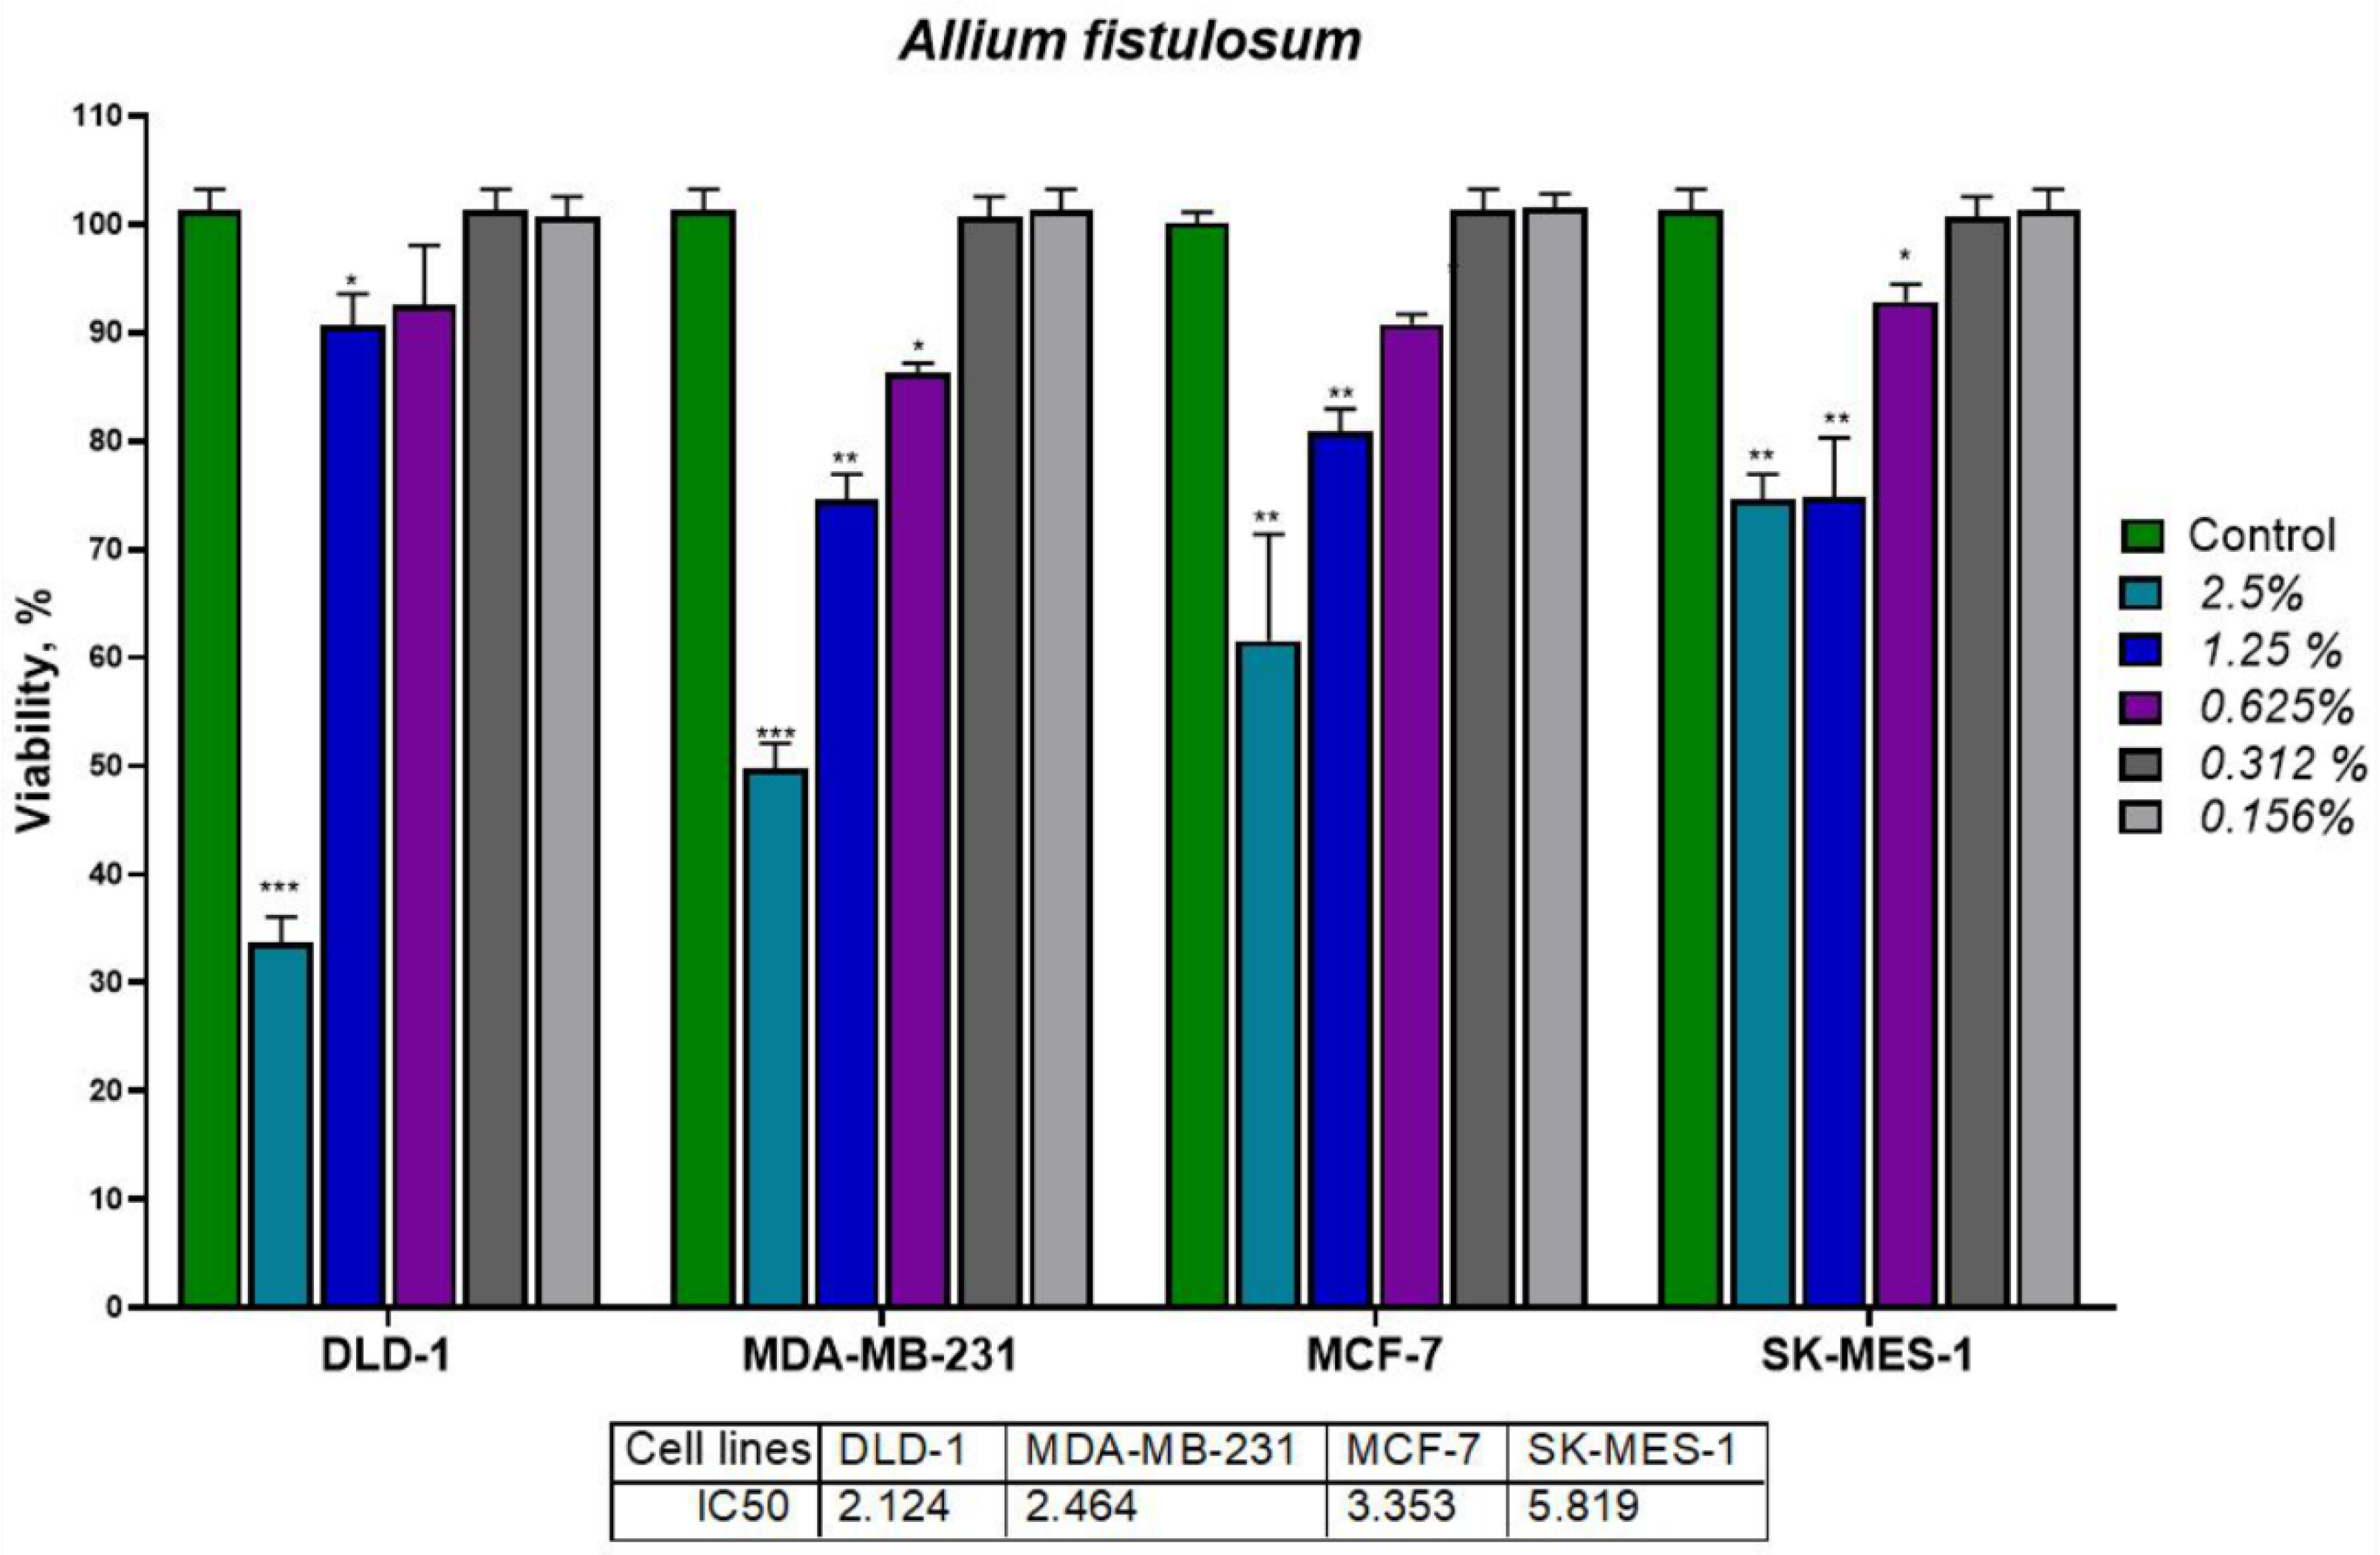 Molecules | Free Full-Text | Phytochemical Analysis and In Vitro Effects of  Allium fistulosum L. and Allium sativum L. Extracts on Human Normal and  Tumor Cell Lines: A Comparative Study | HTML